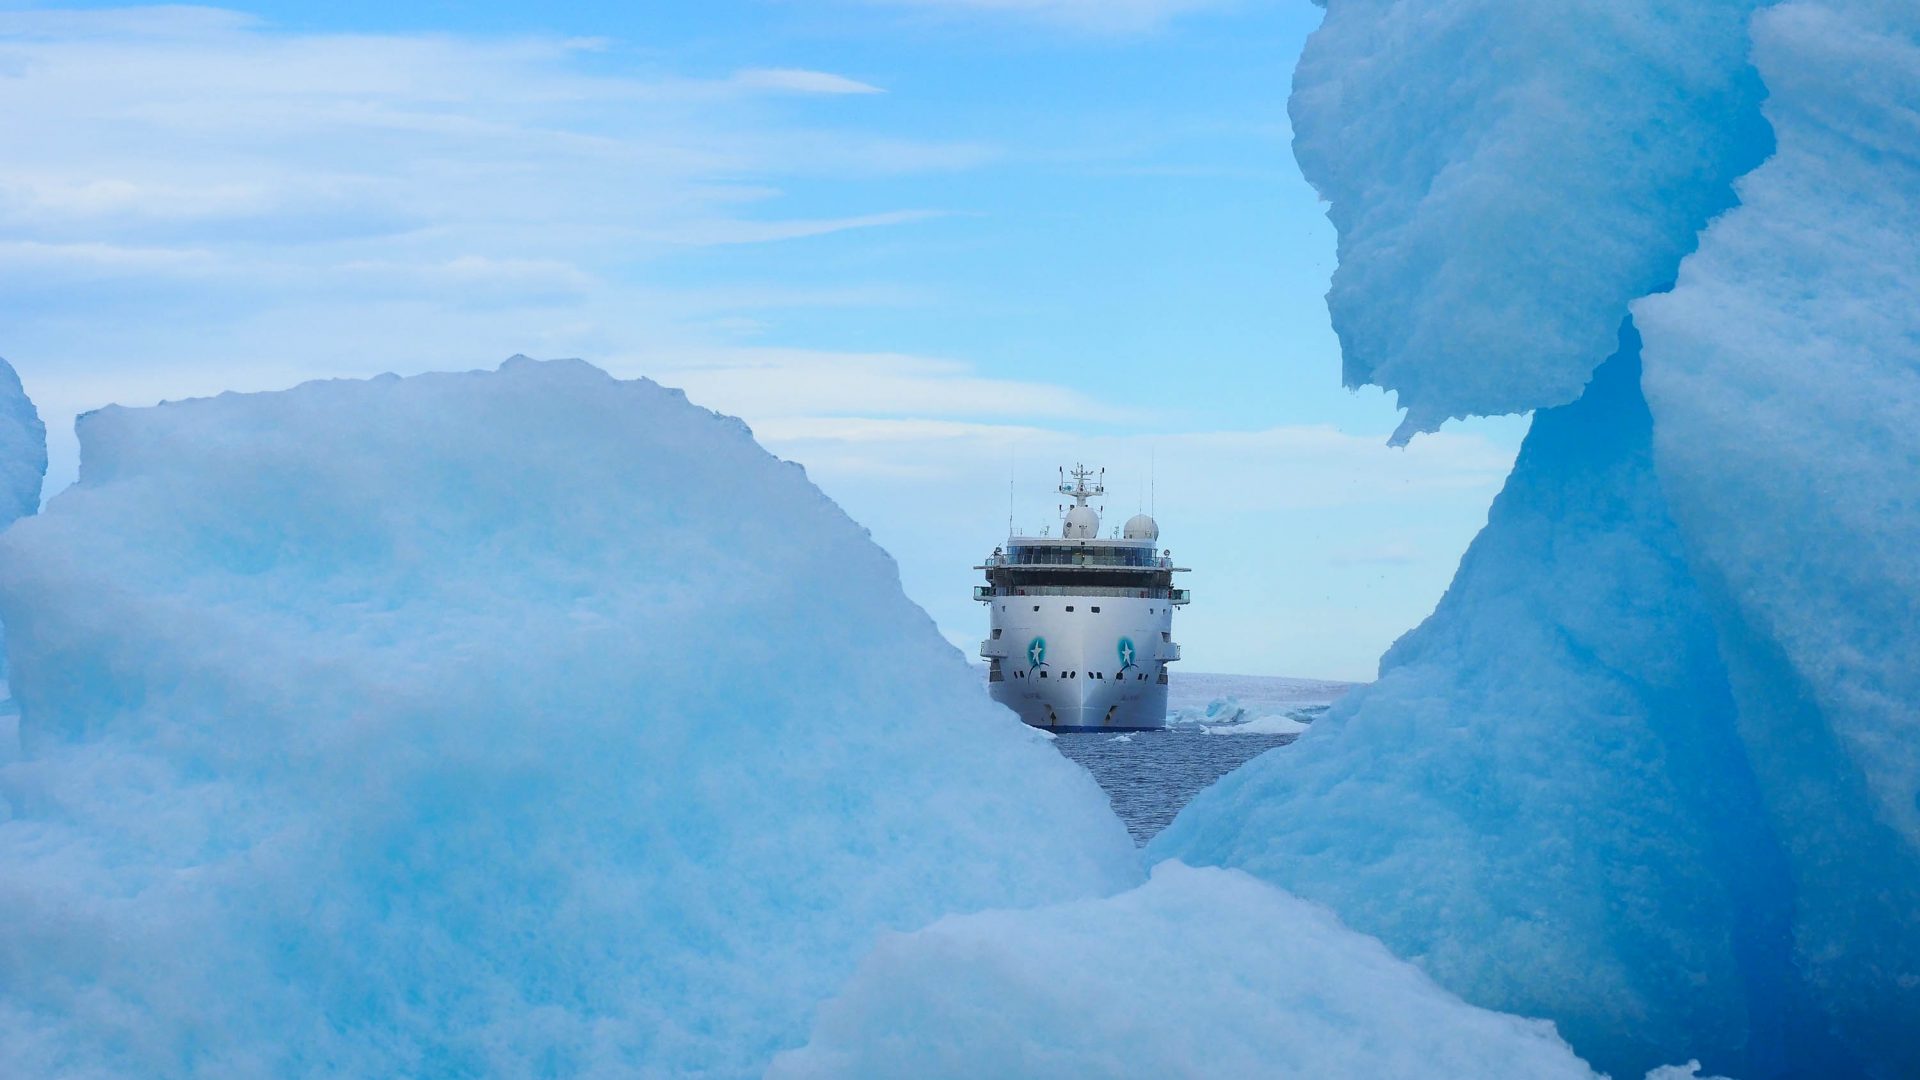 The Greg Mortimer ship can be seen through a gap in between icebergs.